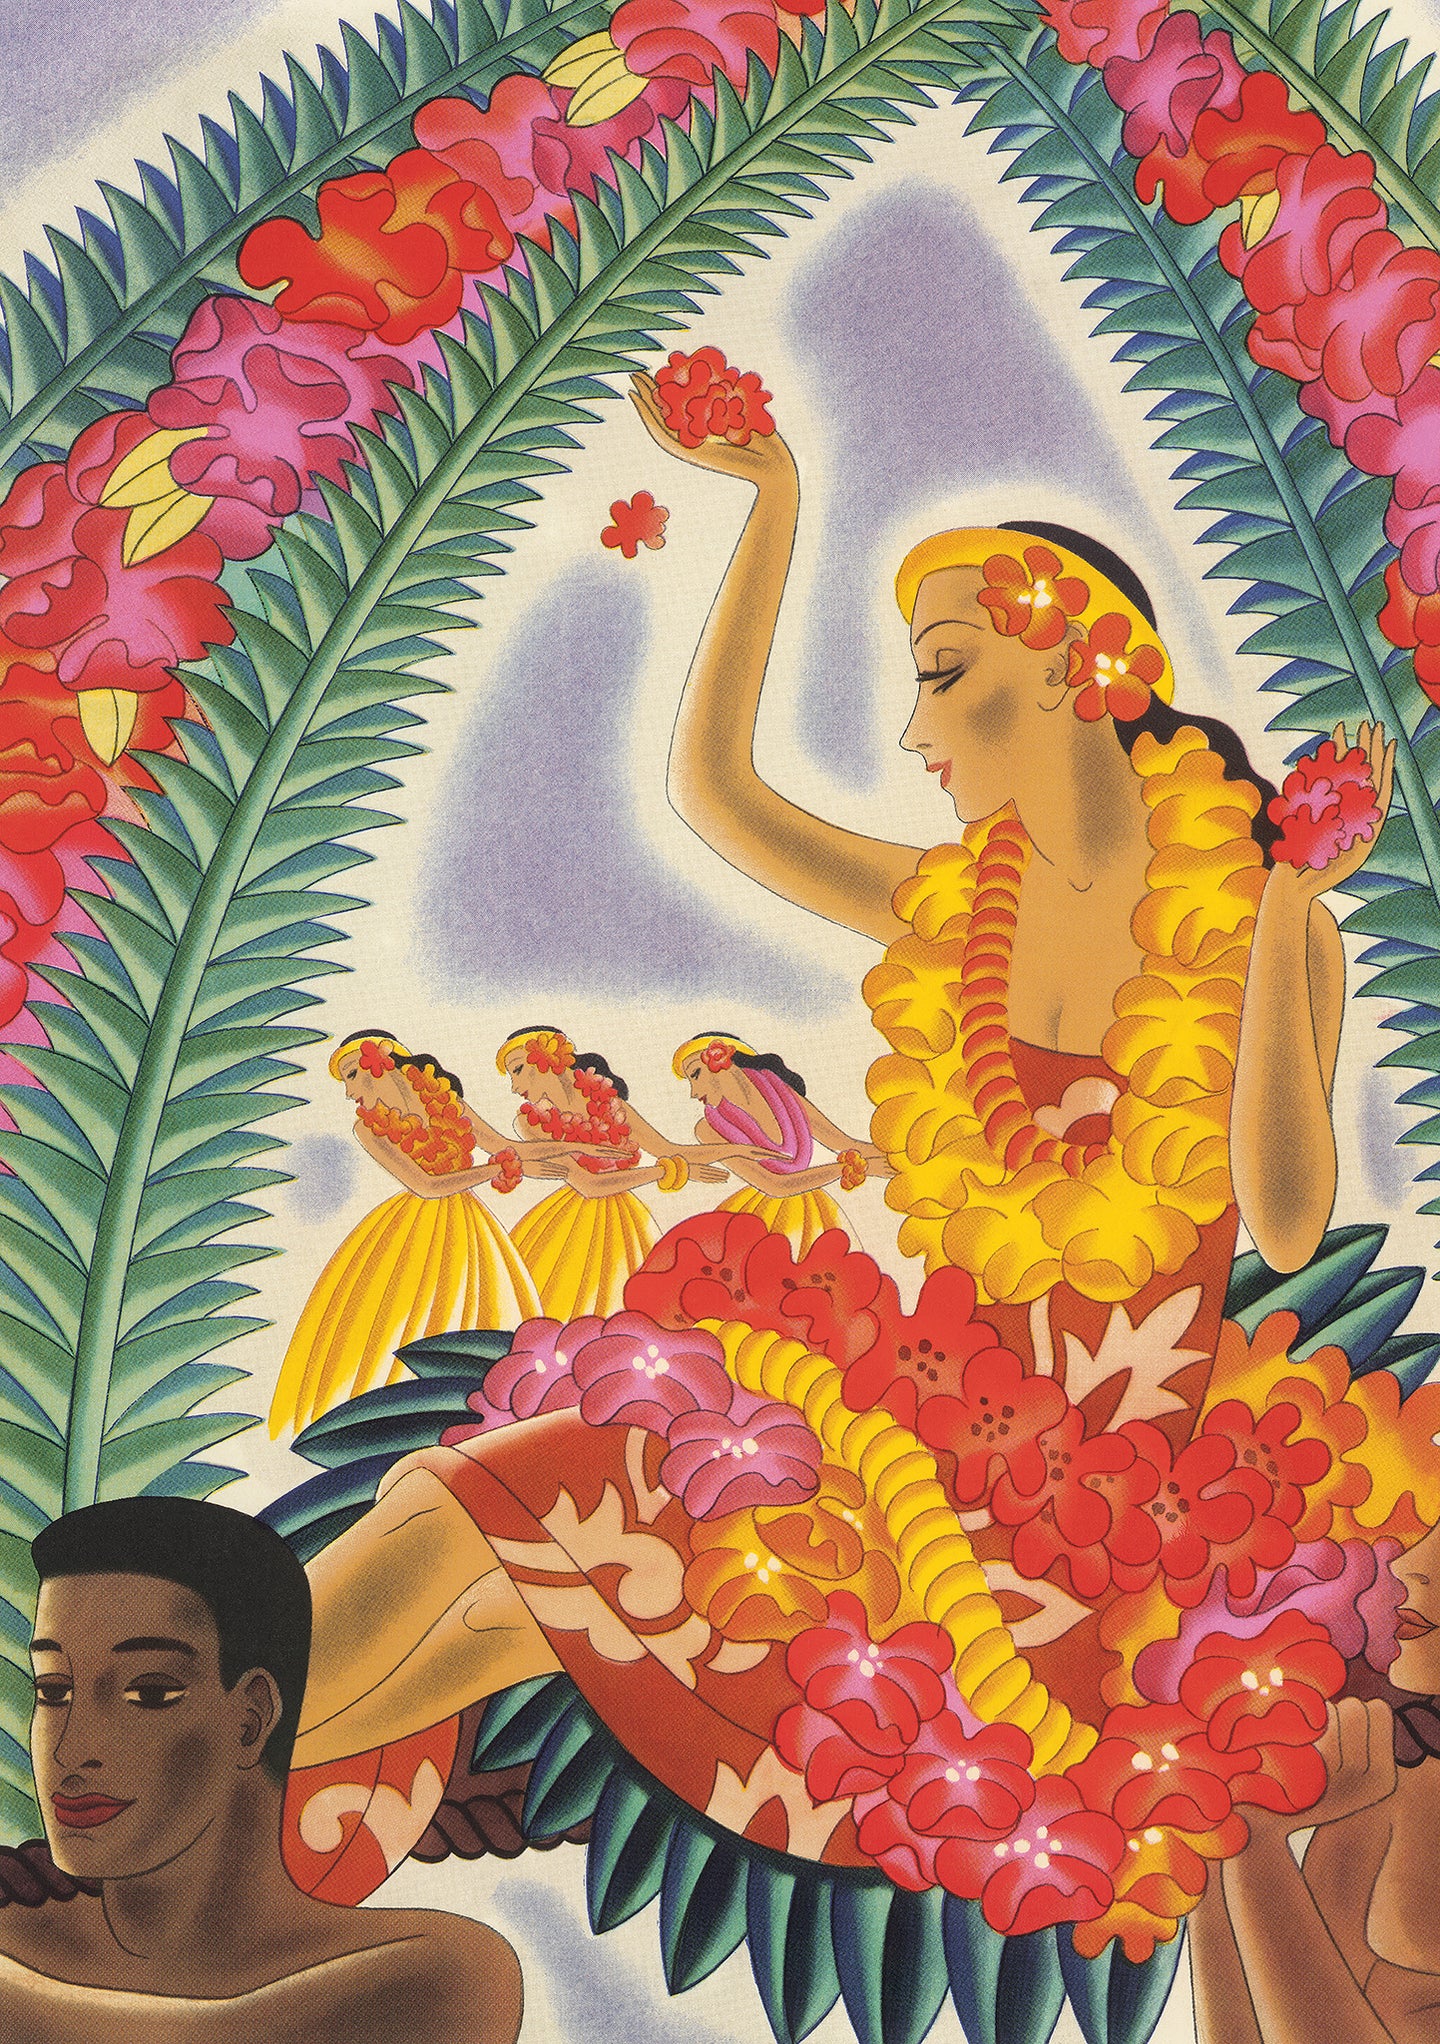 Colorful scene of a woman in a red dress sitting and holding red flowers wearing leis of red and gold and 3 hula dancers in gold skirts in the background. Artist Frank McIntosh.